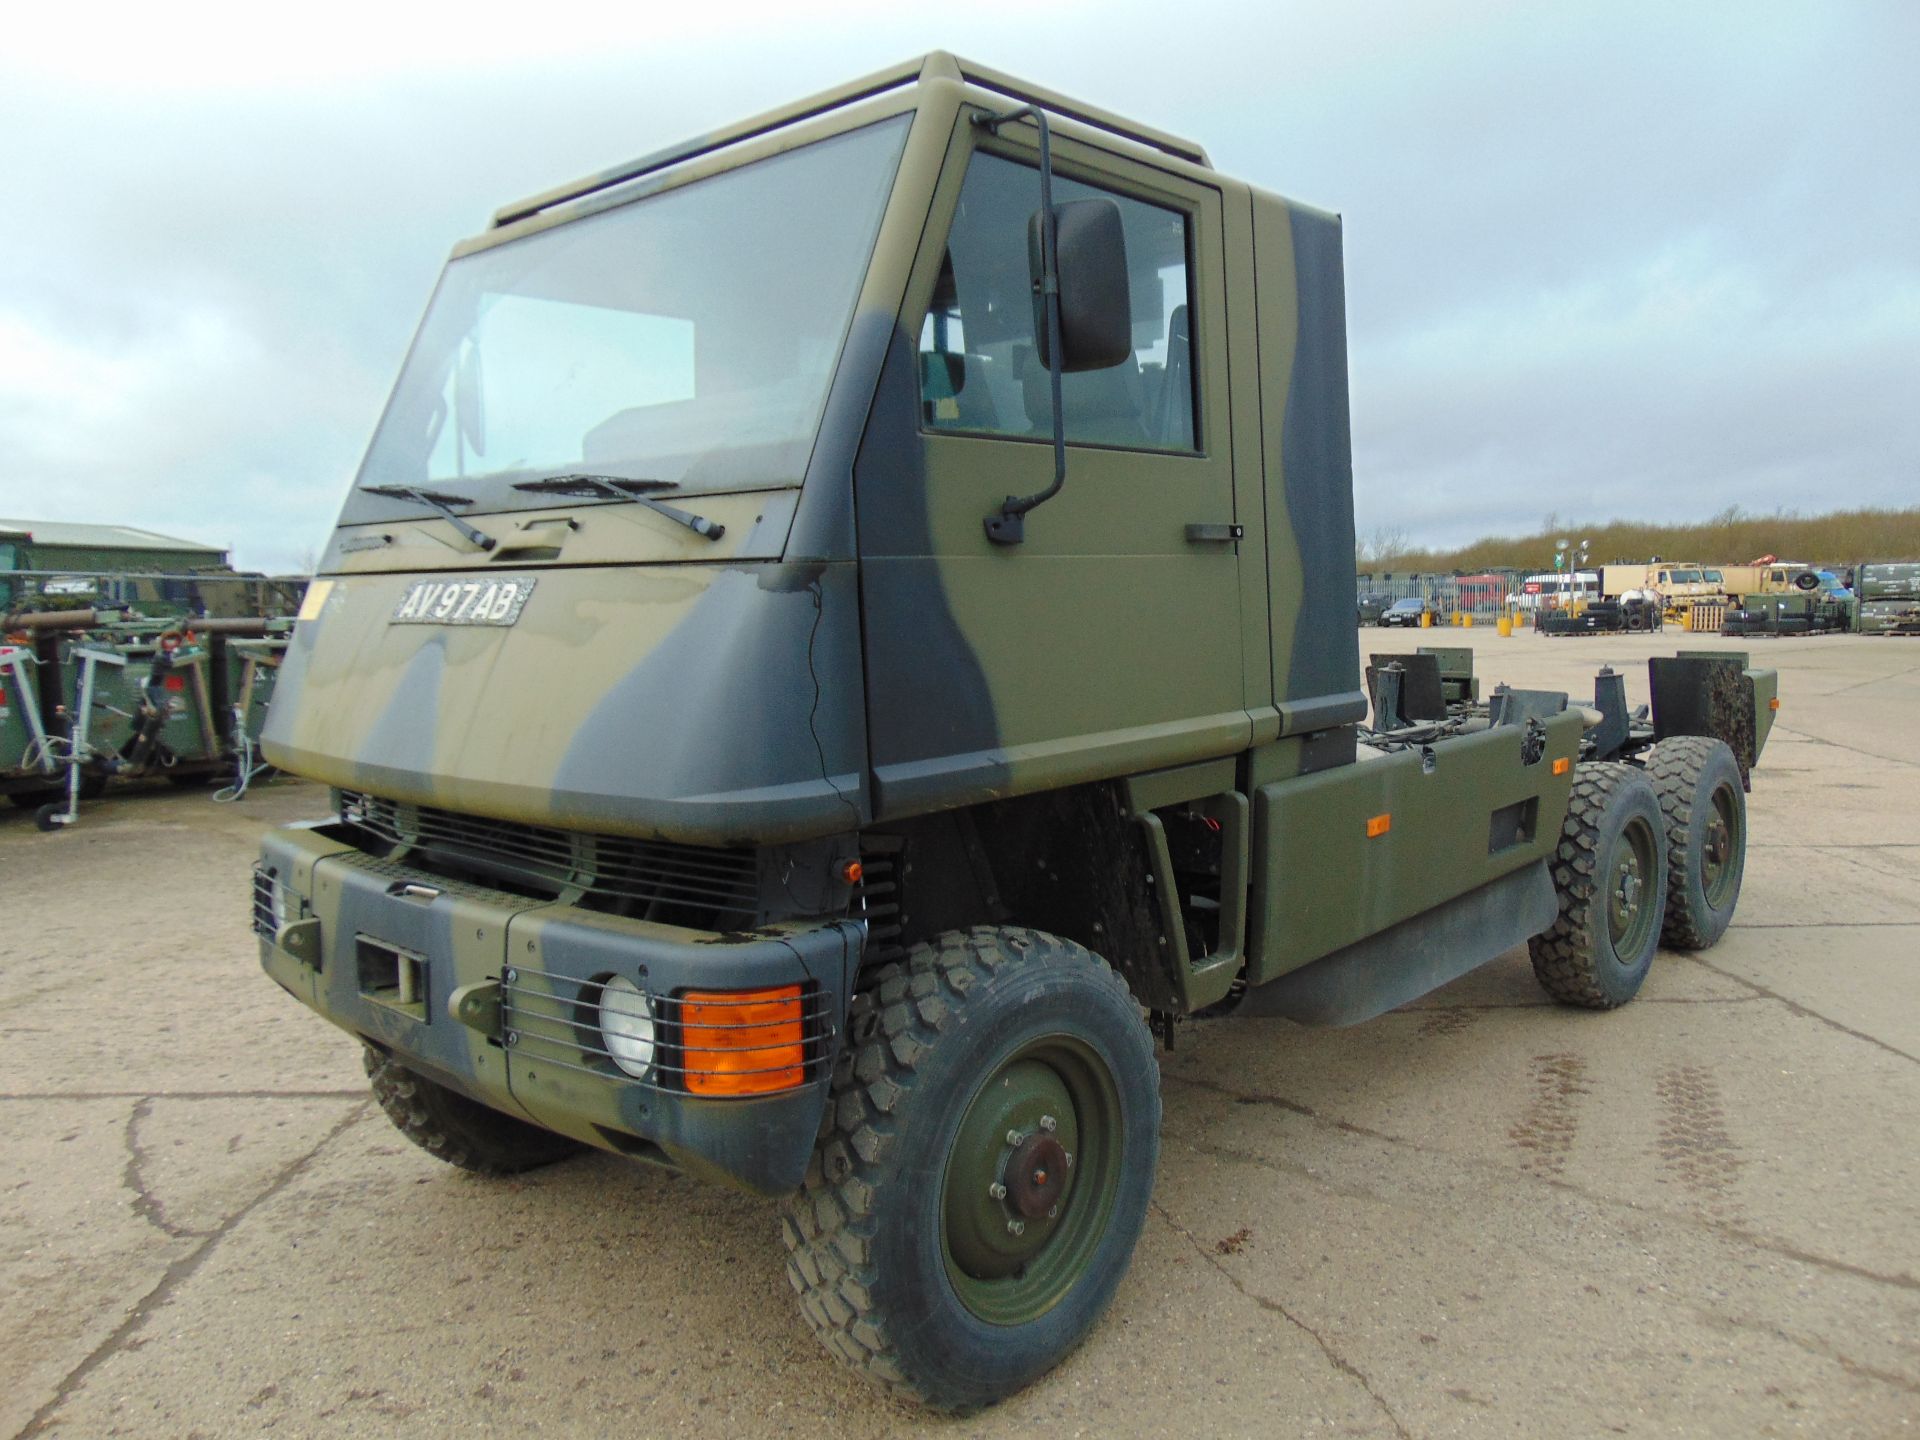 Ex Reserve Left Hand Drive Mowag Bucher Duro II 6x6 High-Mobility Tactical Vehicle - Image 3 of 14